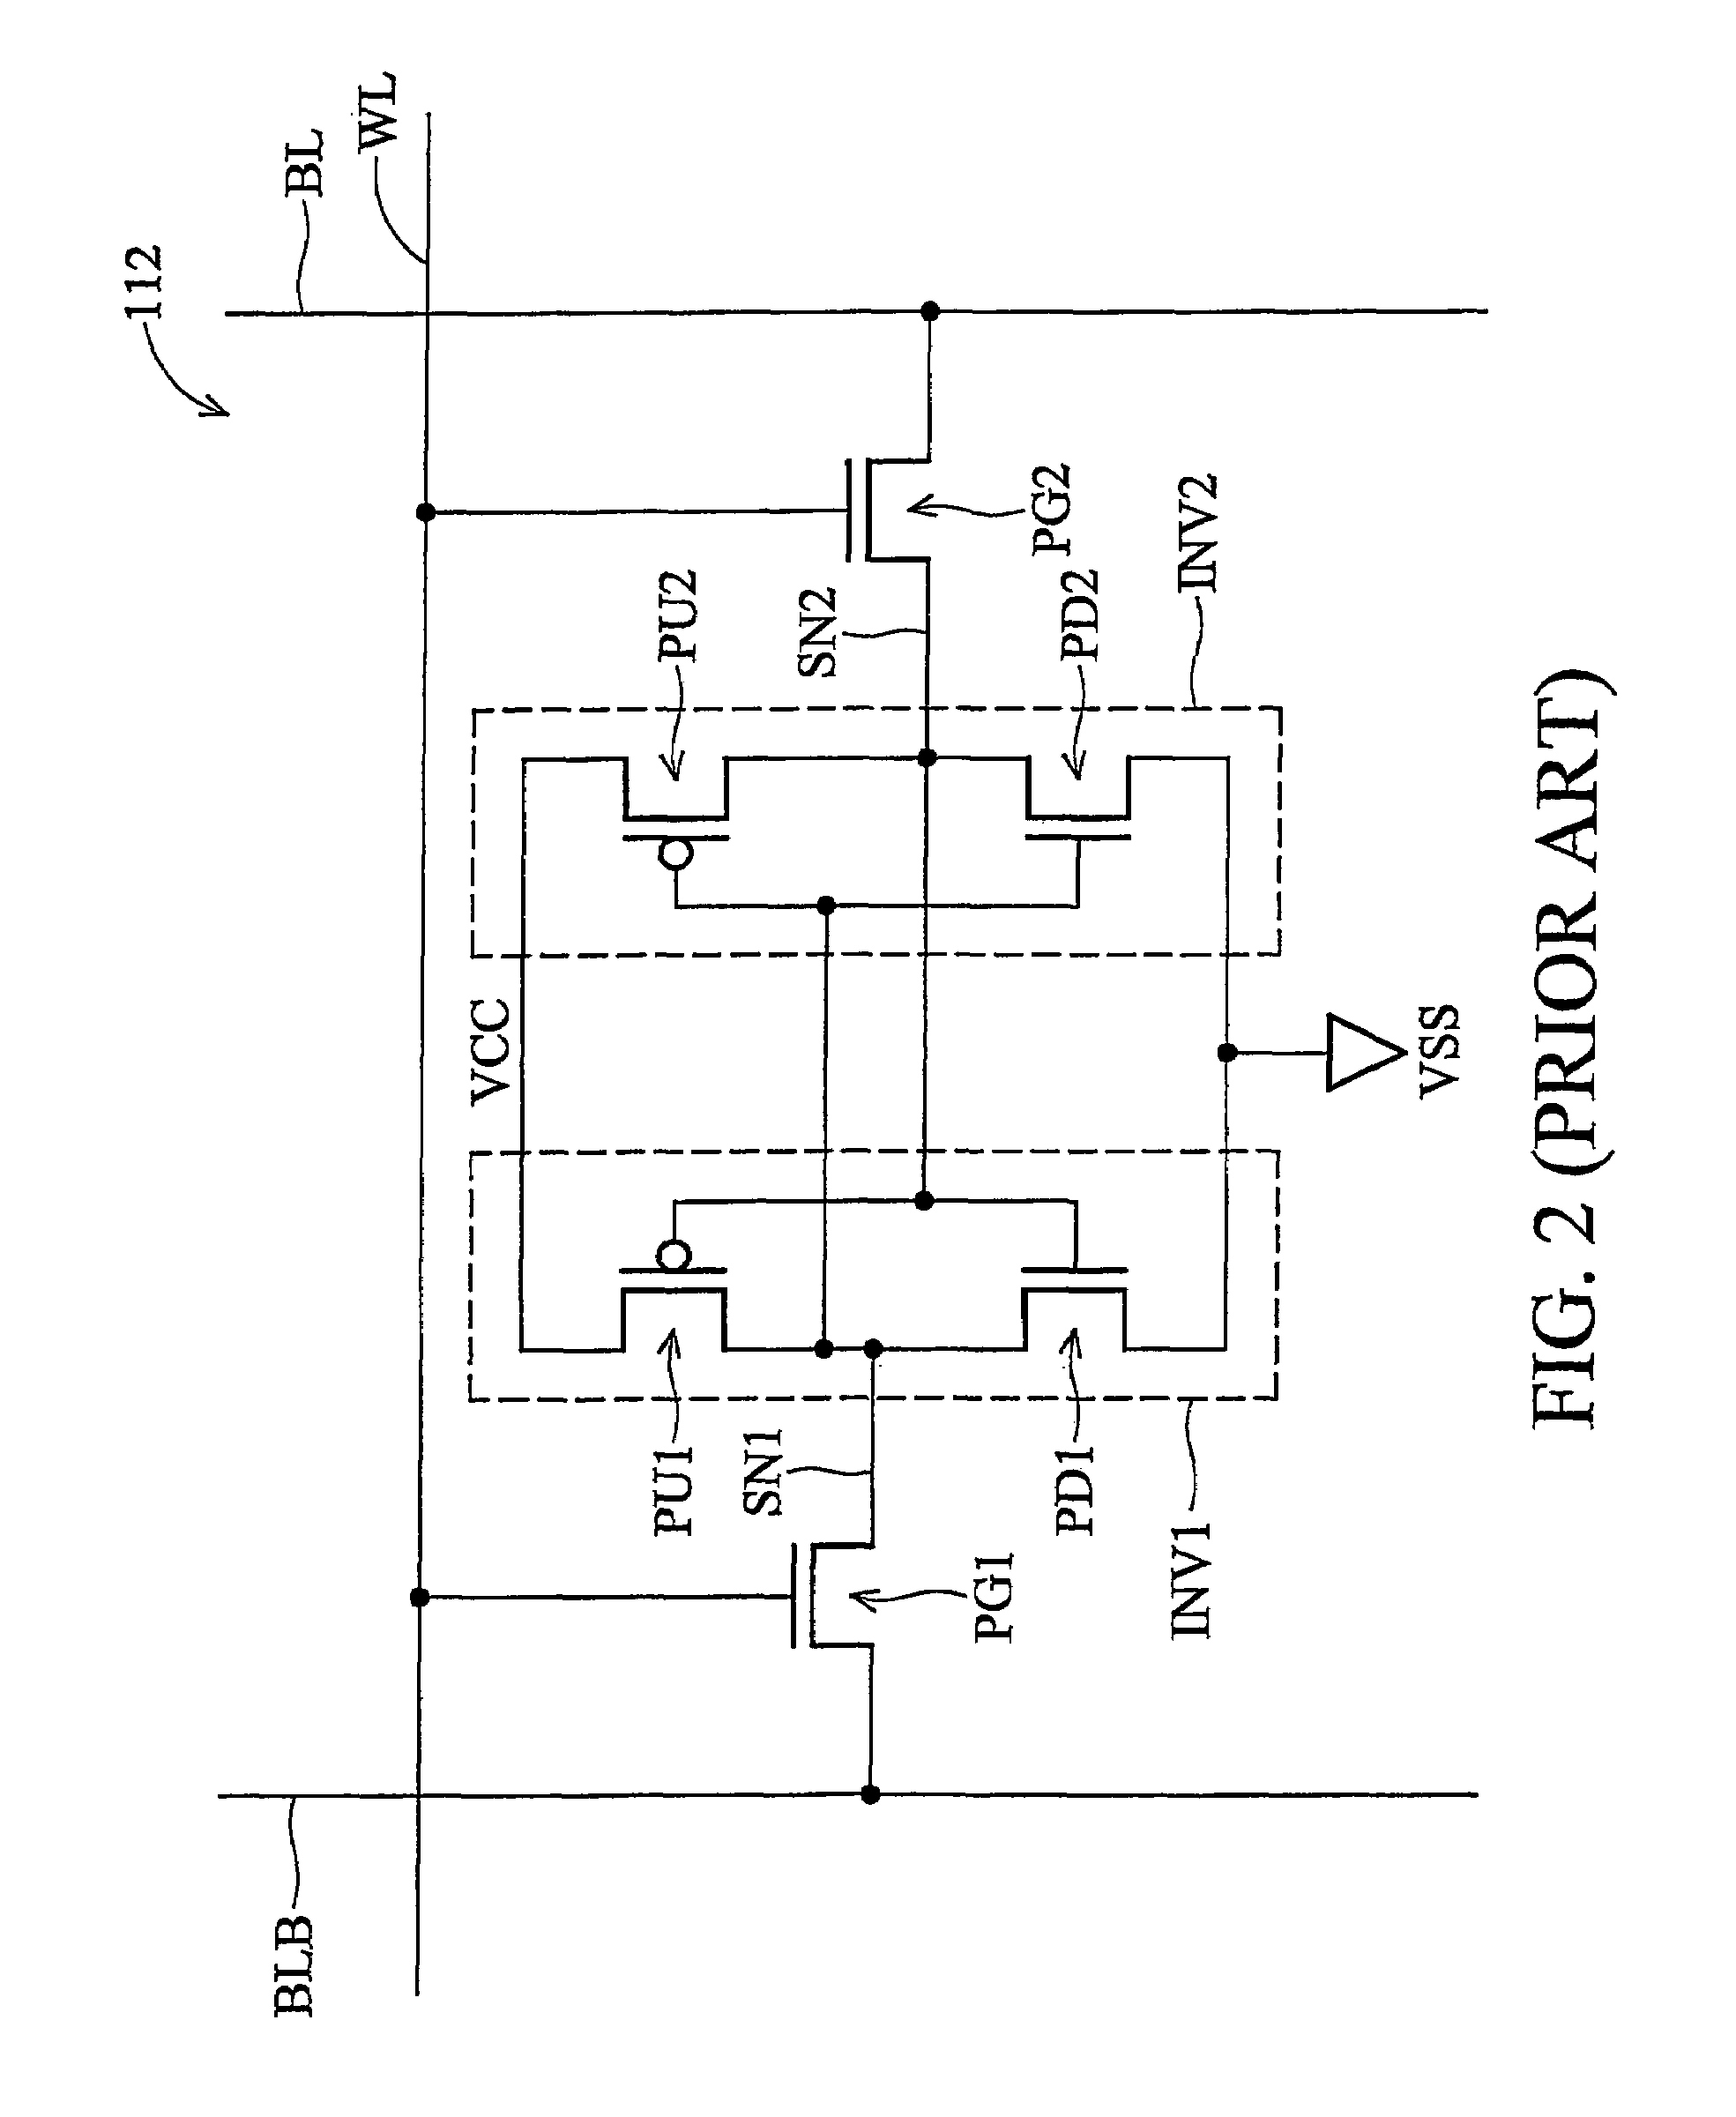 SRAM cell for soft-error rate reduction and cell stability improvement